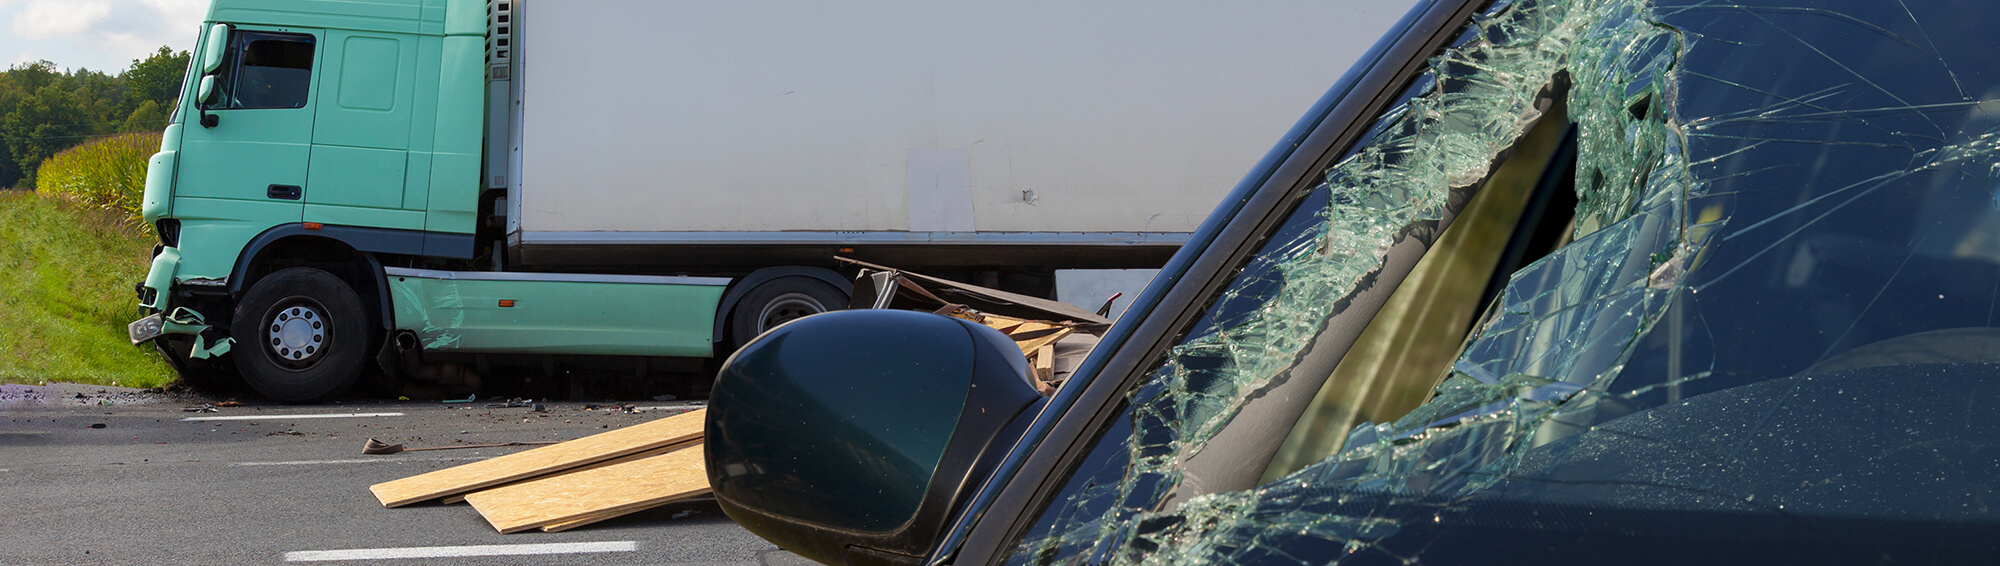 2 Reasons to Call a Lawyer After a Truck Accident